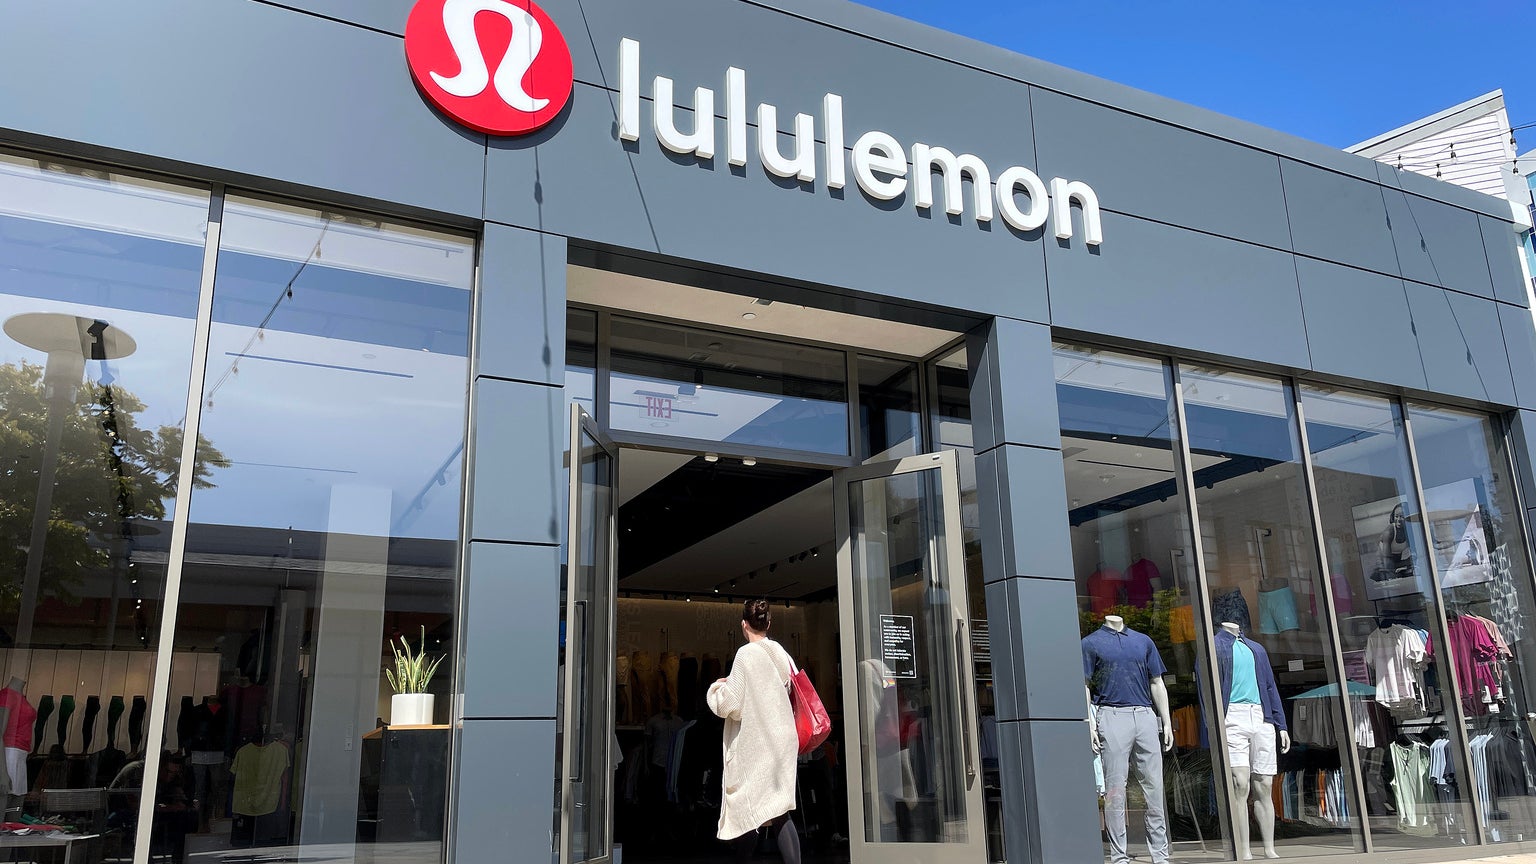 Lululemon: Outperforming Peers And Gaining Market Share, Yet